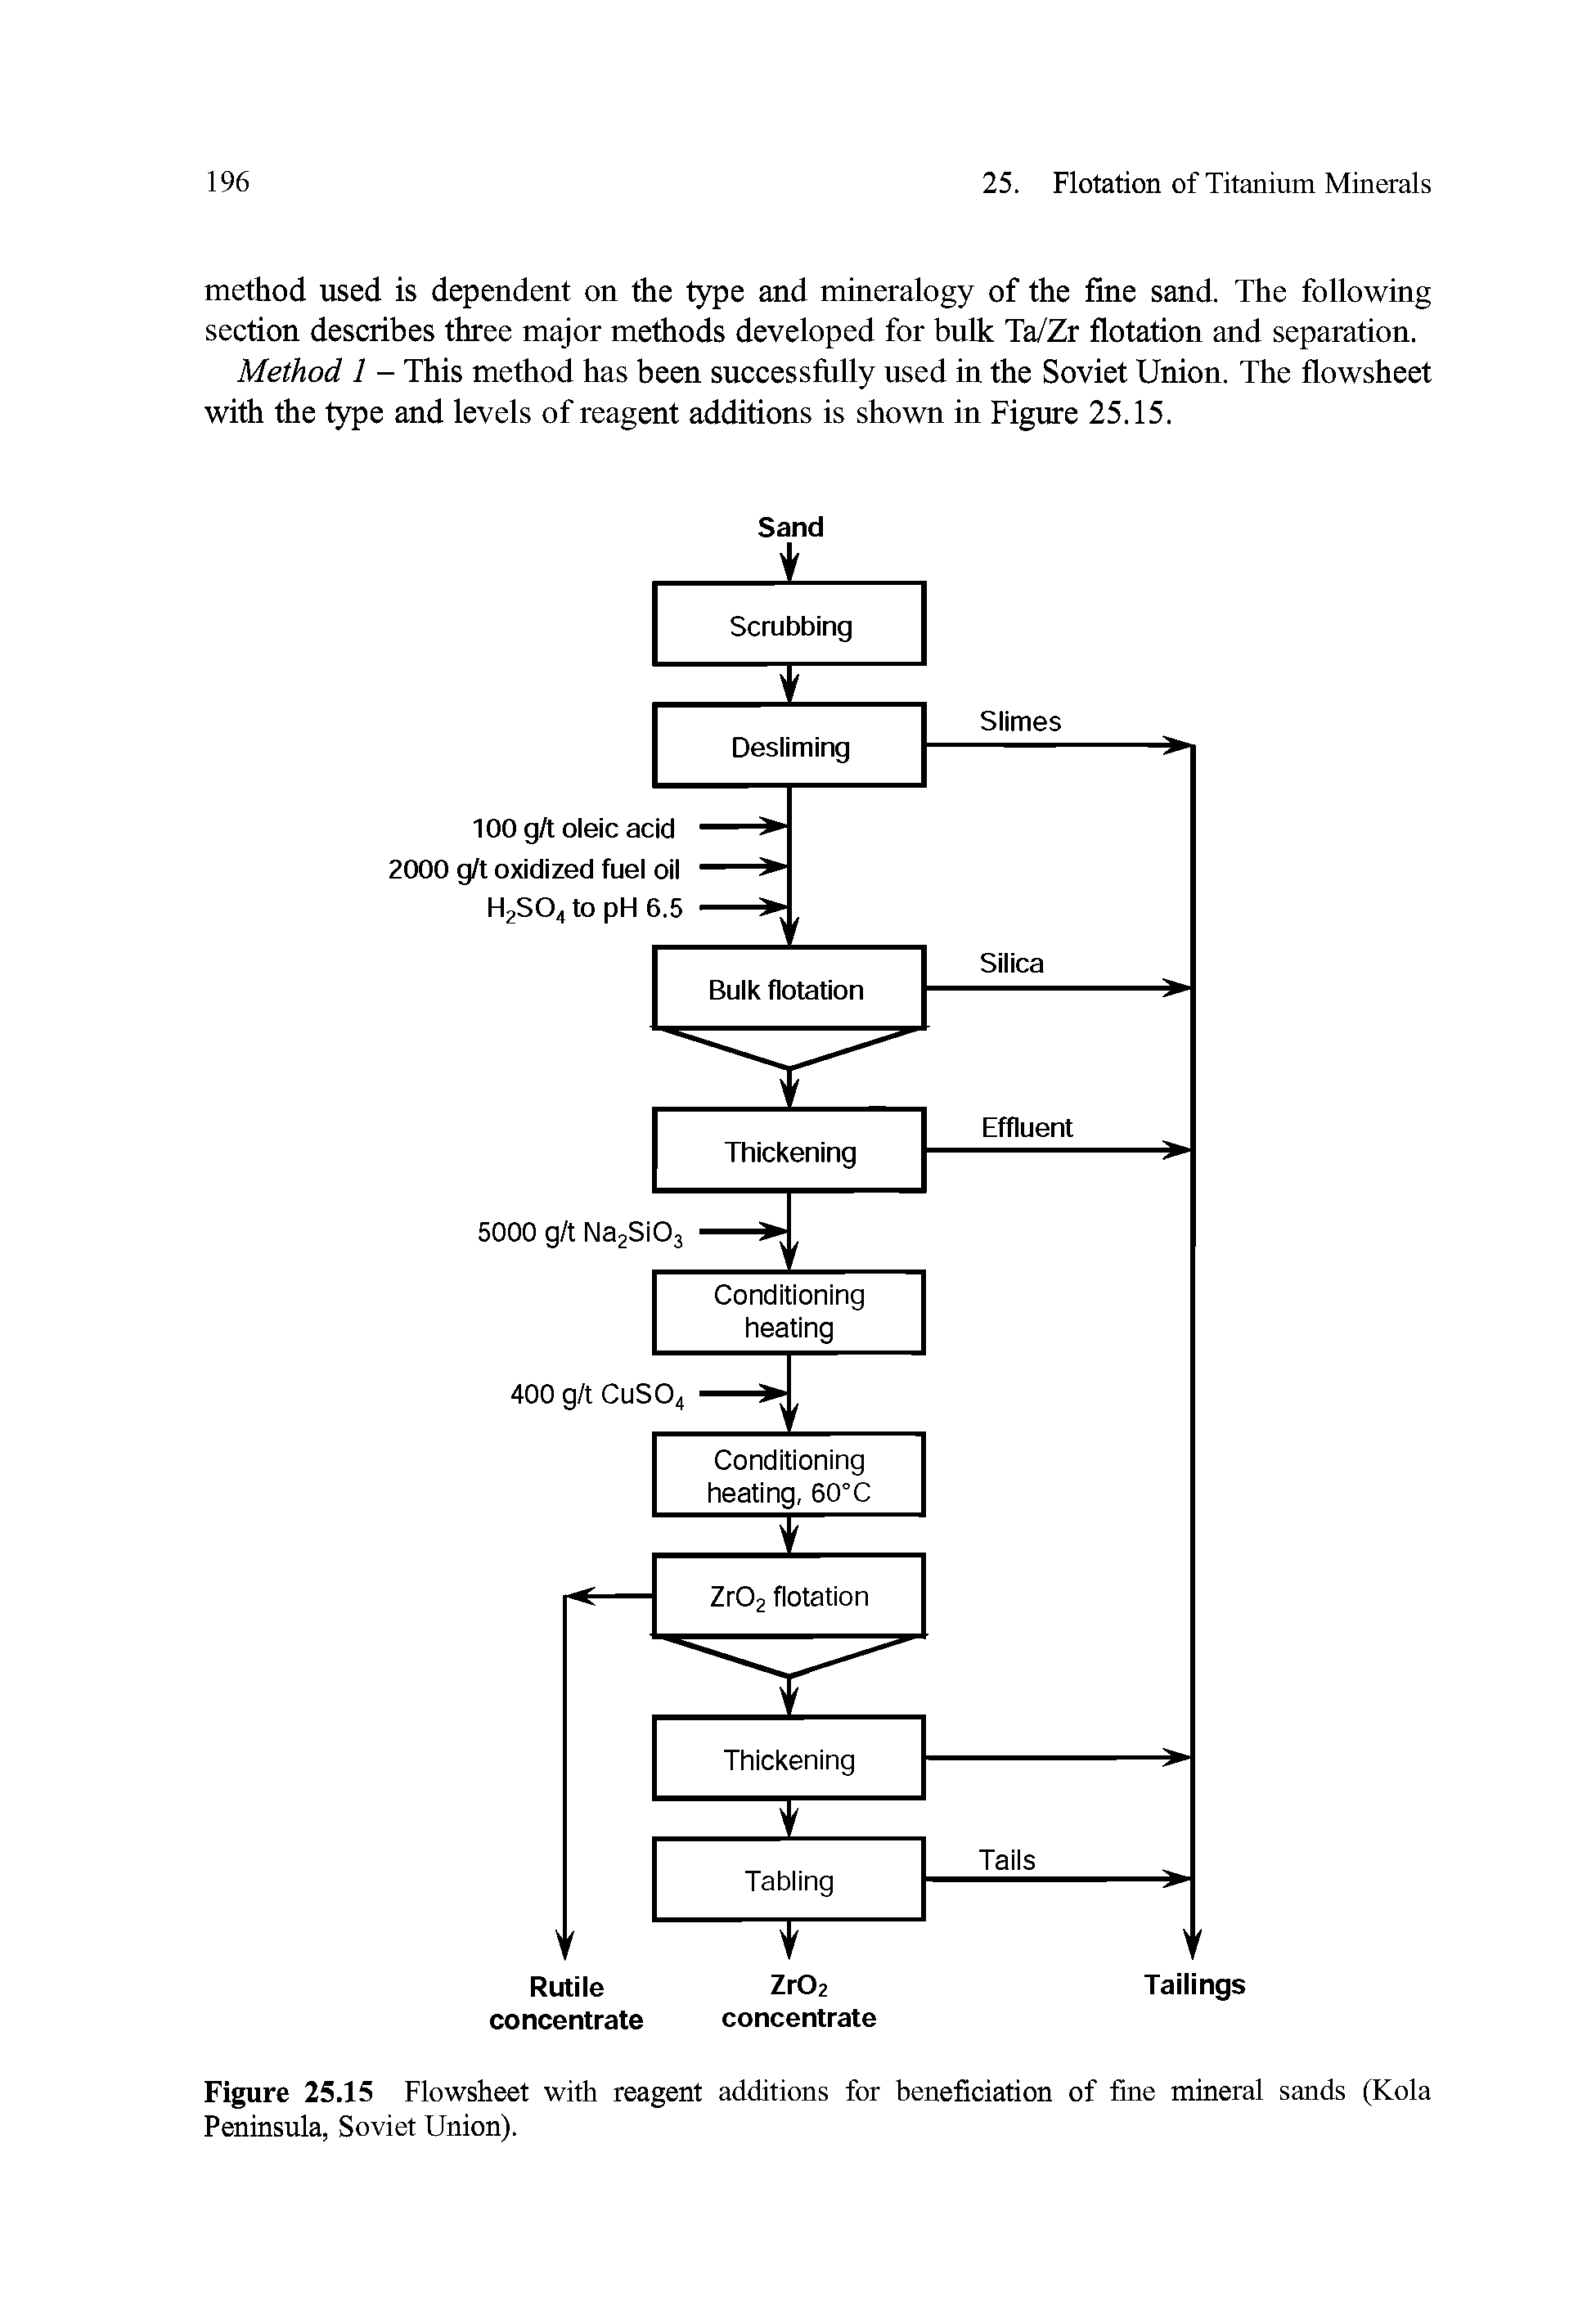 Figure 25.15 Flowsheet with reagent additions for beneficiation of fine mineral sands (Kola Peninsula, Soviet Union).